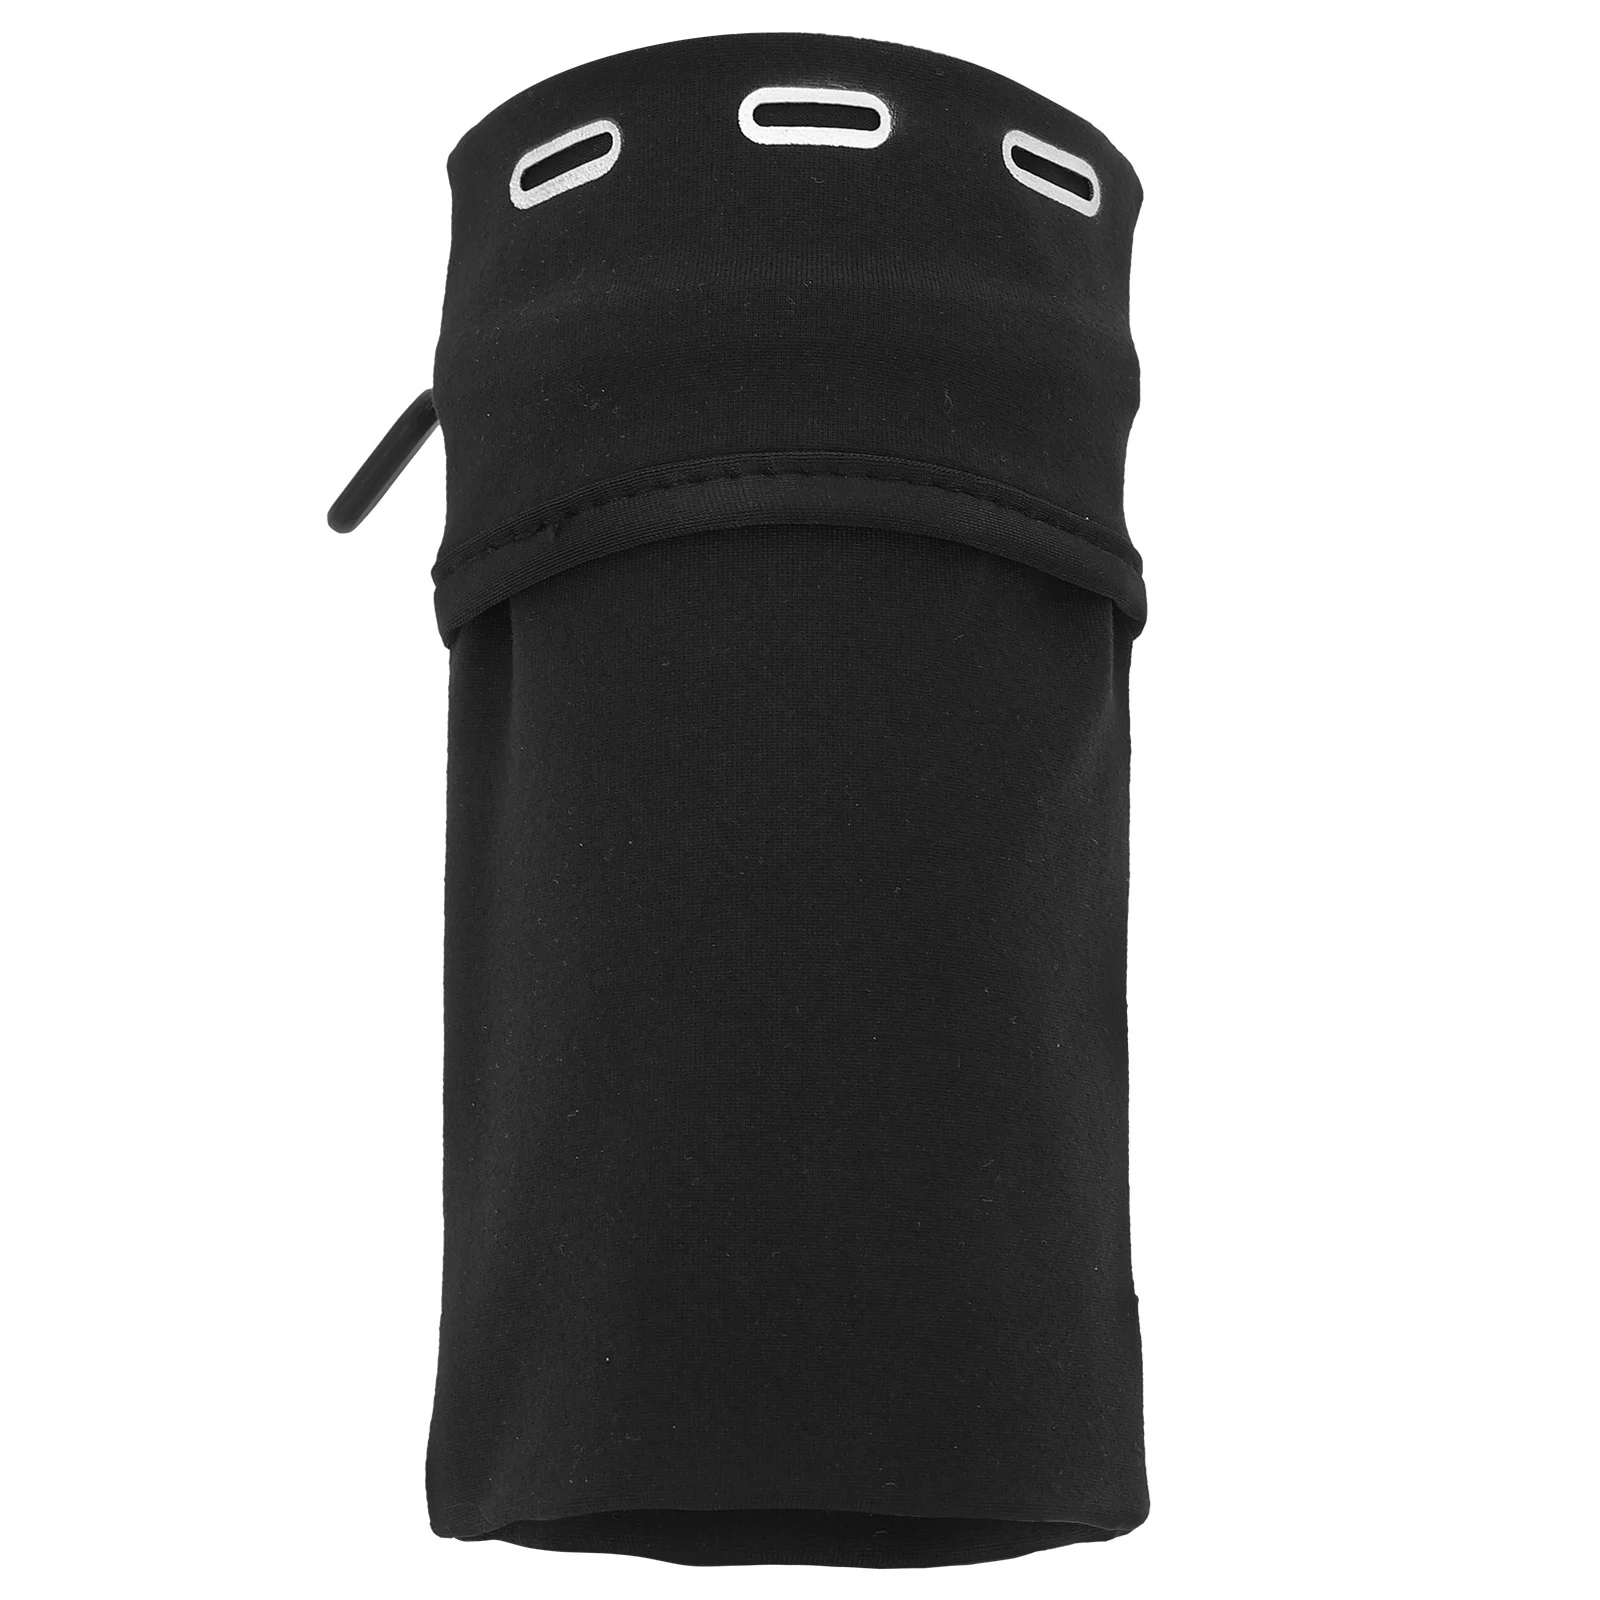 

Phone Armband Holder Arm Running Bag Cell Pouch Sports Wrist Strap Mobile Walking Sleeve Cellphone Workout Bands Zipper Hold